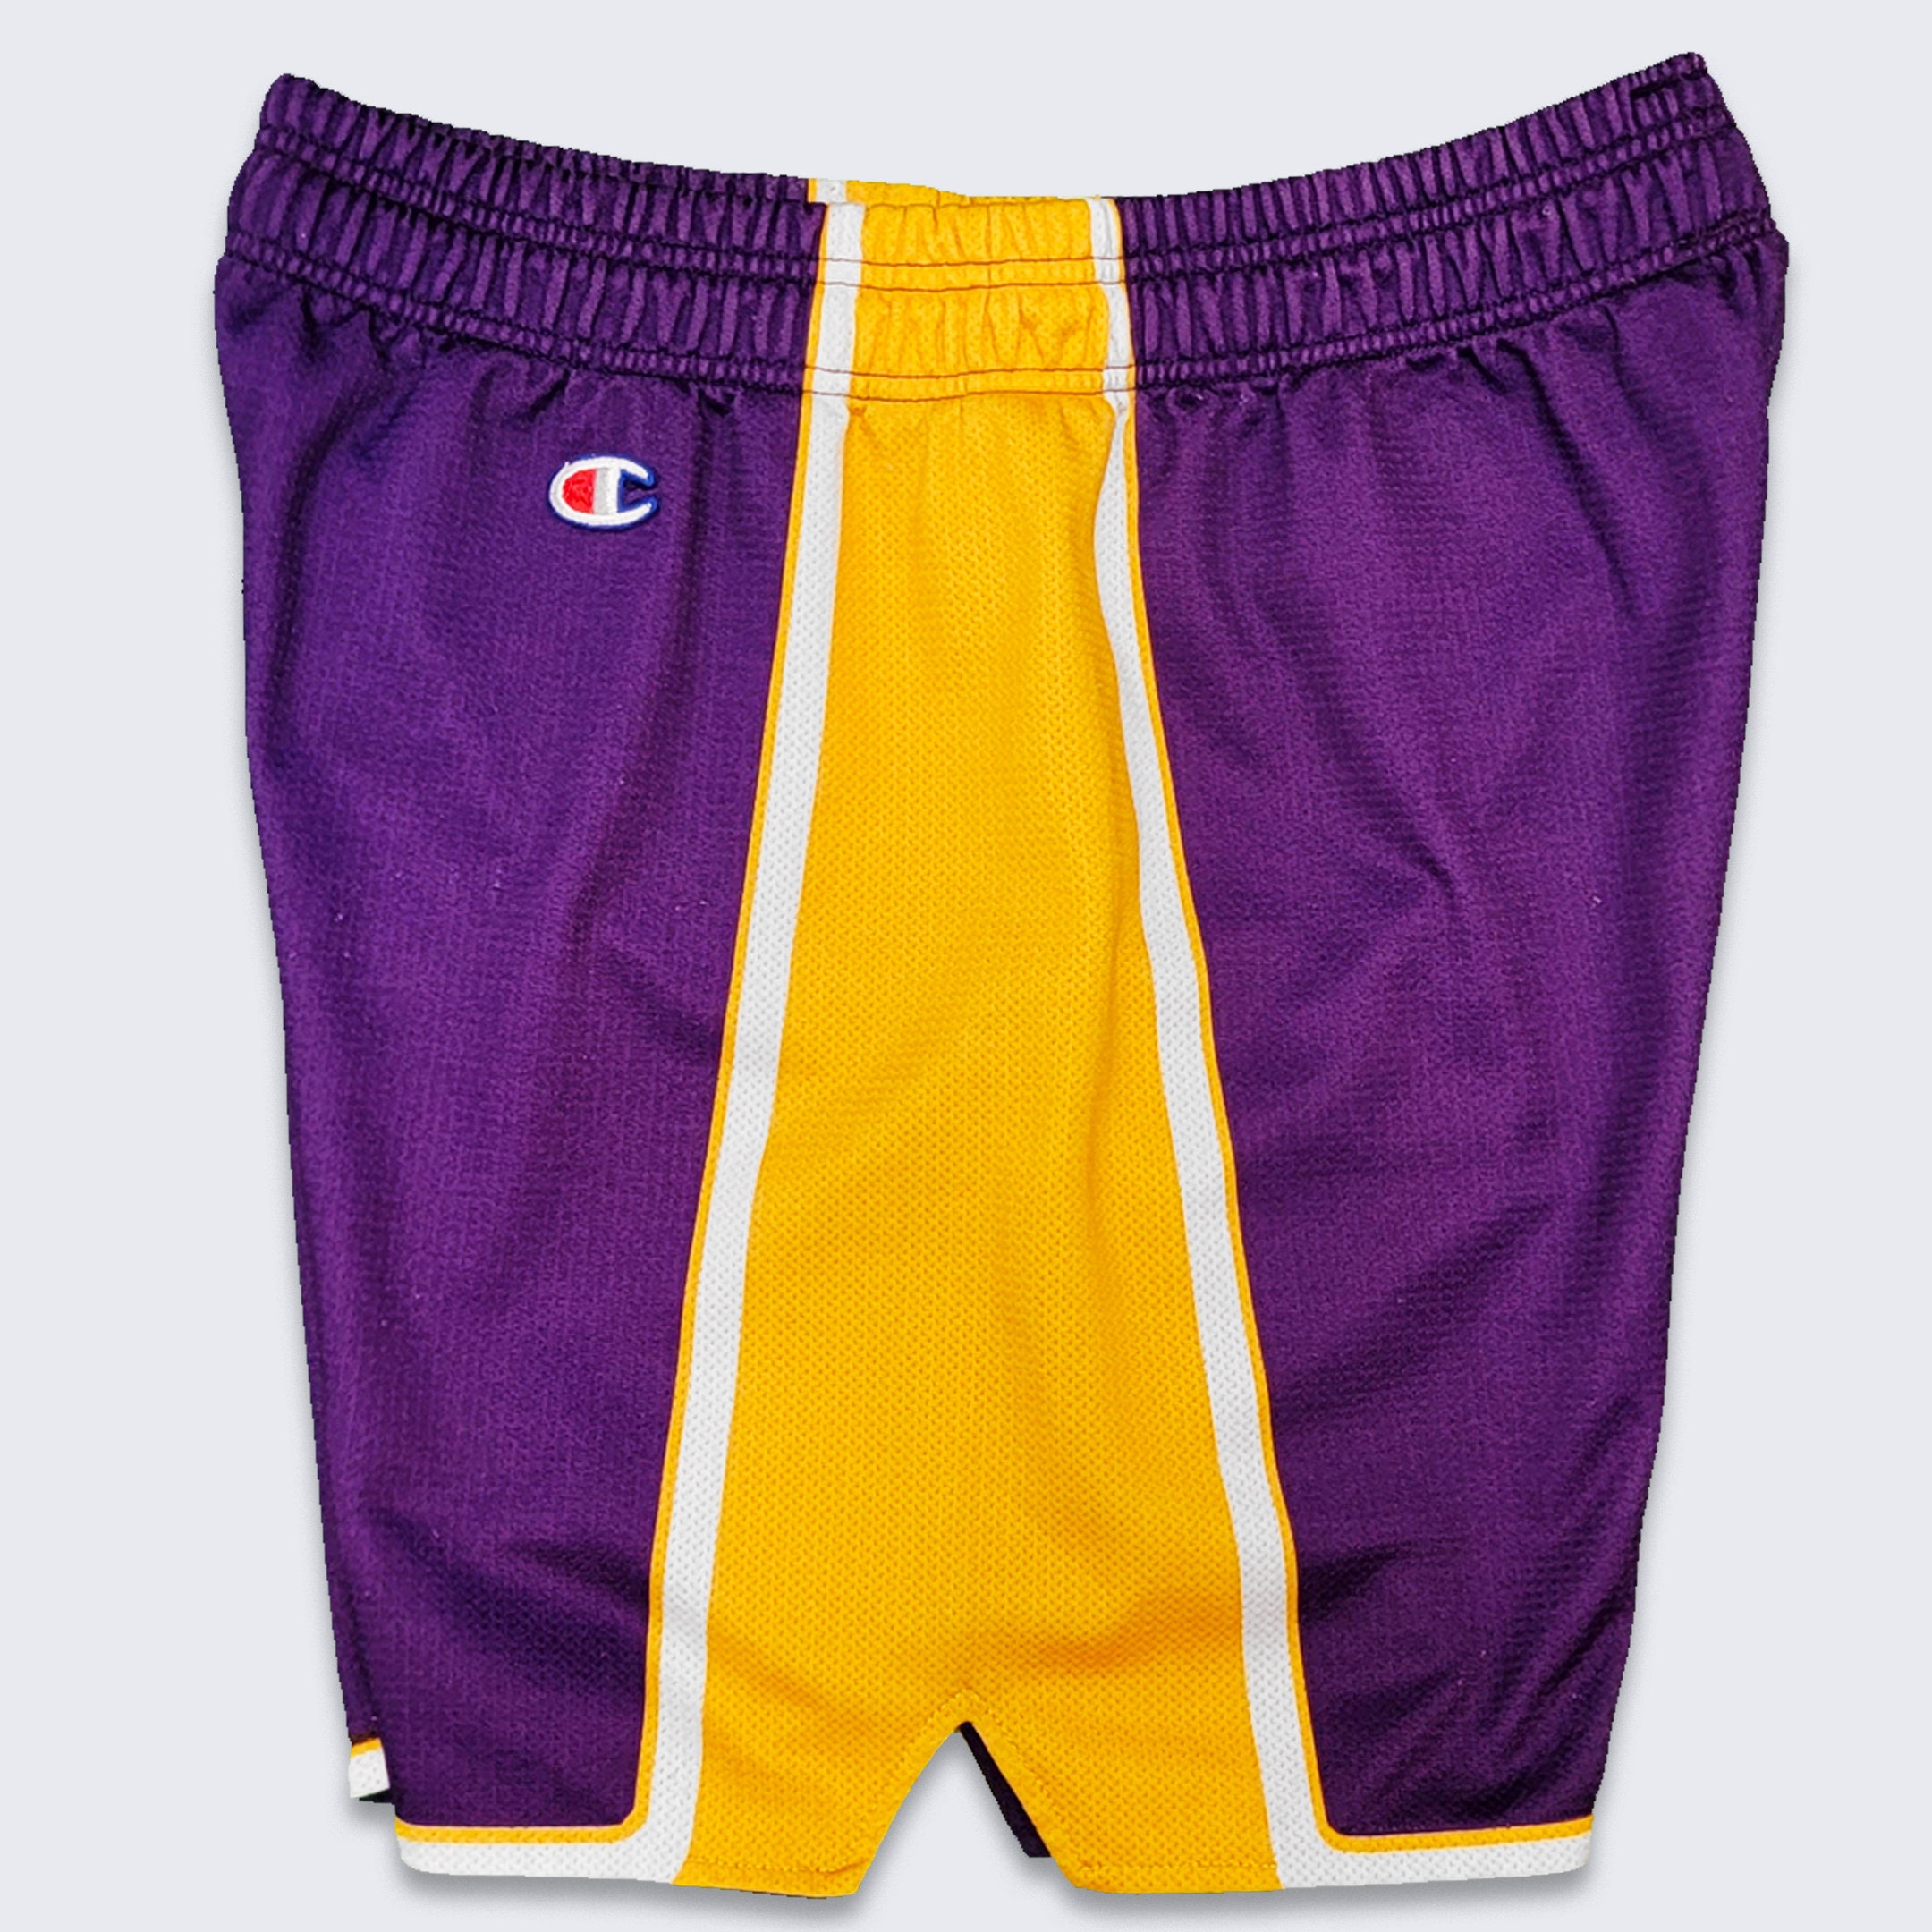 HolySport Los Angeles Lakers Vintage Champion Basketball Shorts - White and Yellow Color Bottoms - NBA Basketball - Size Men's Large 